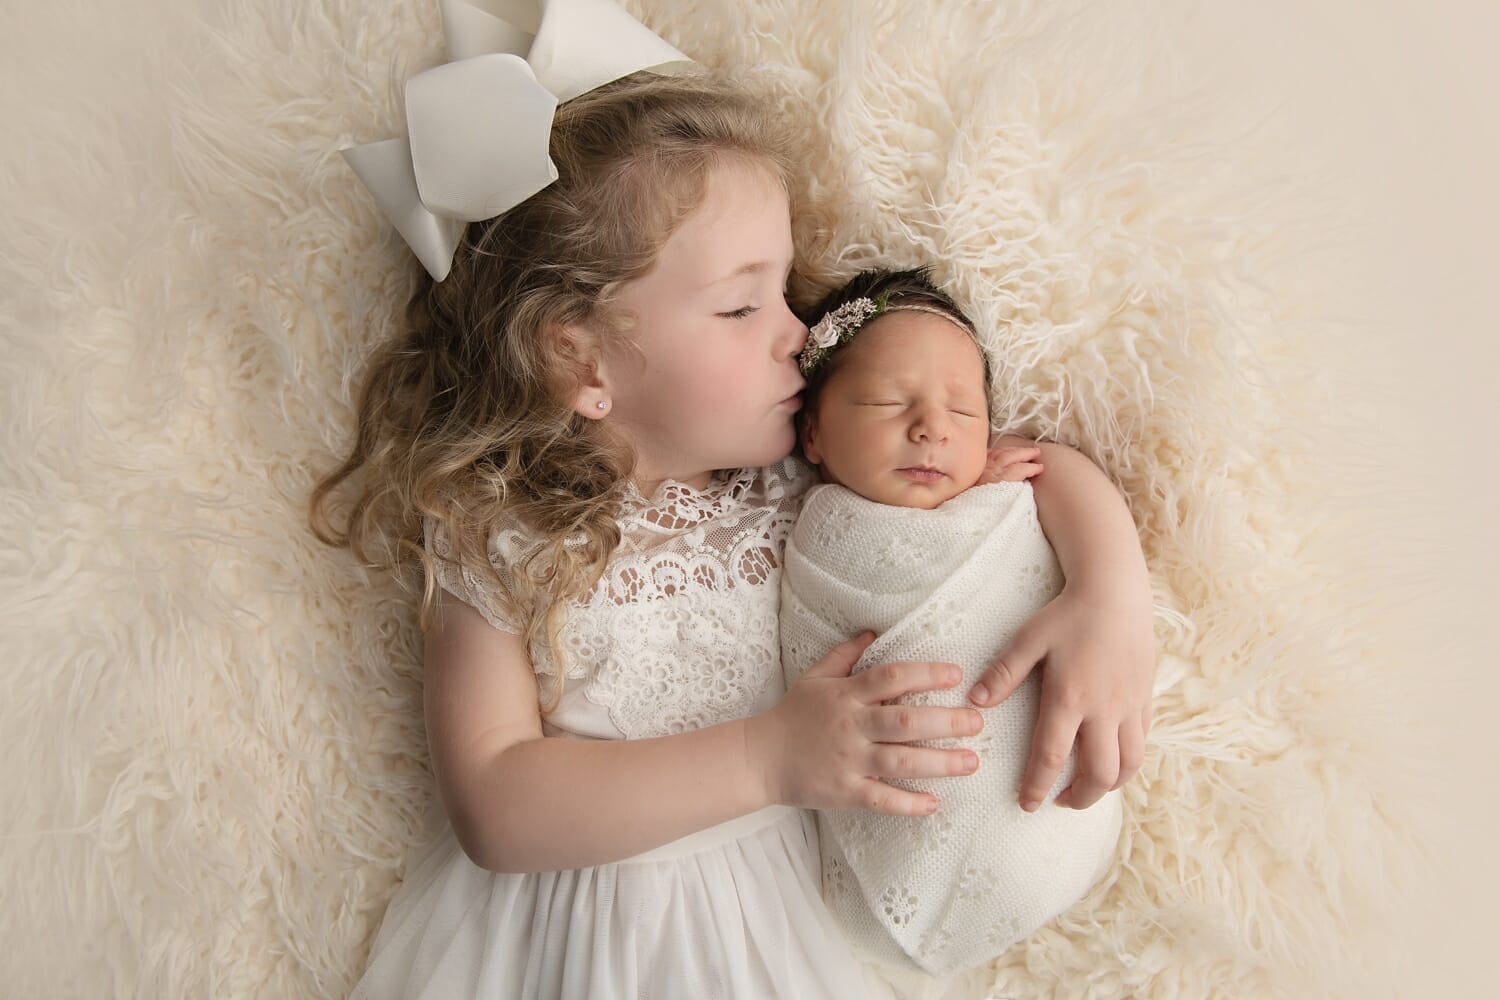 A sibling lays beside a newborn baby on a white rug